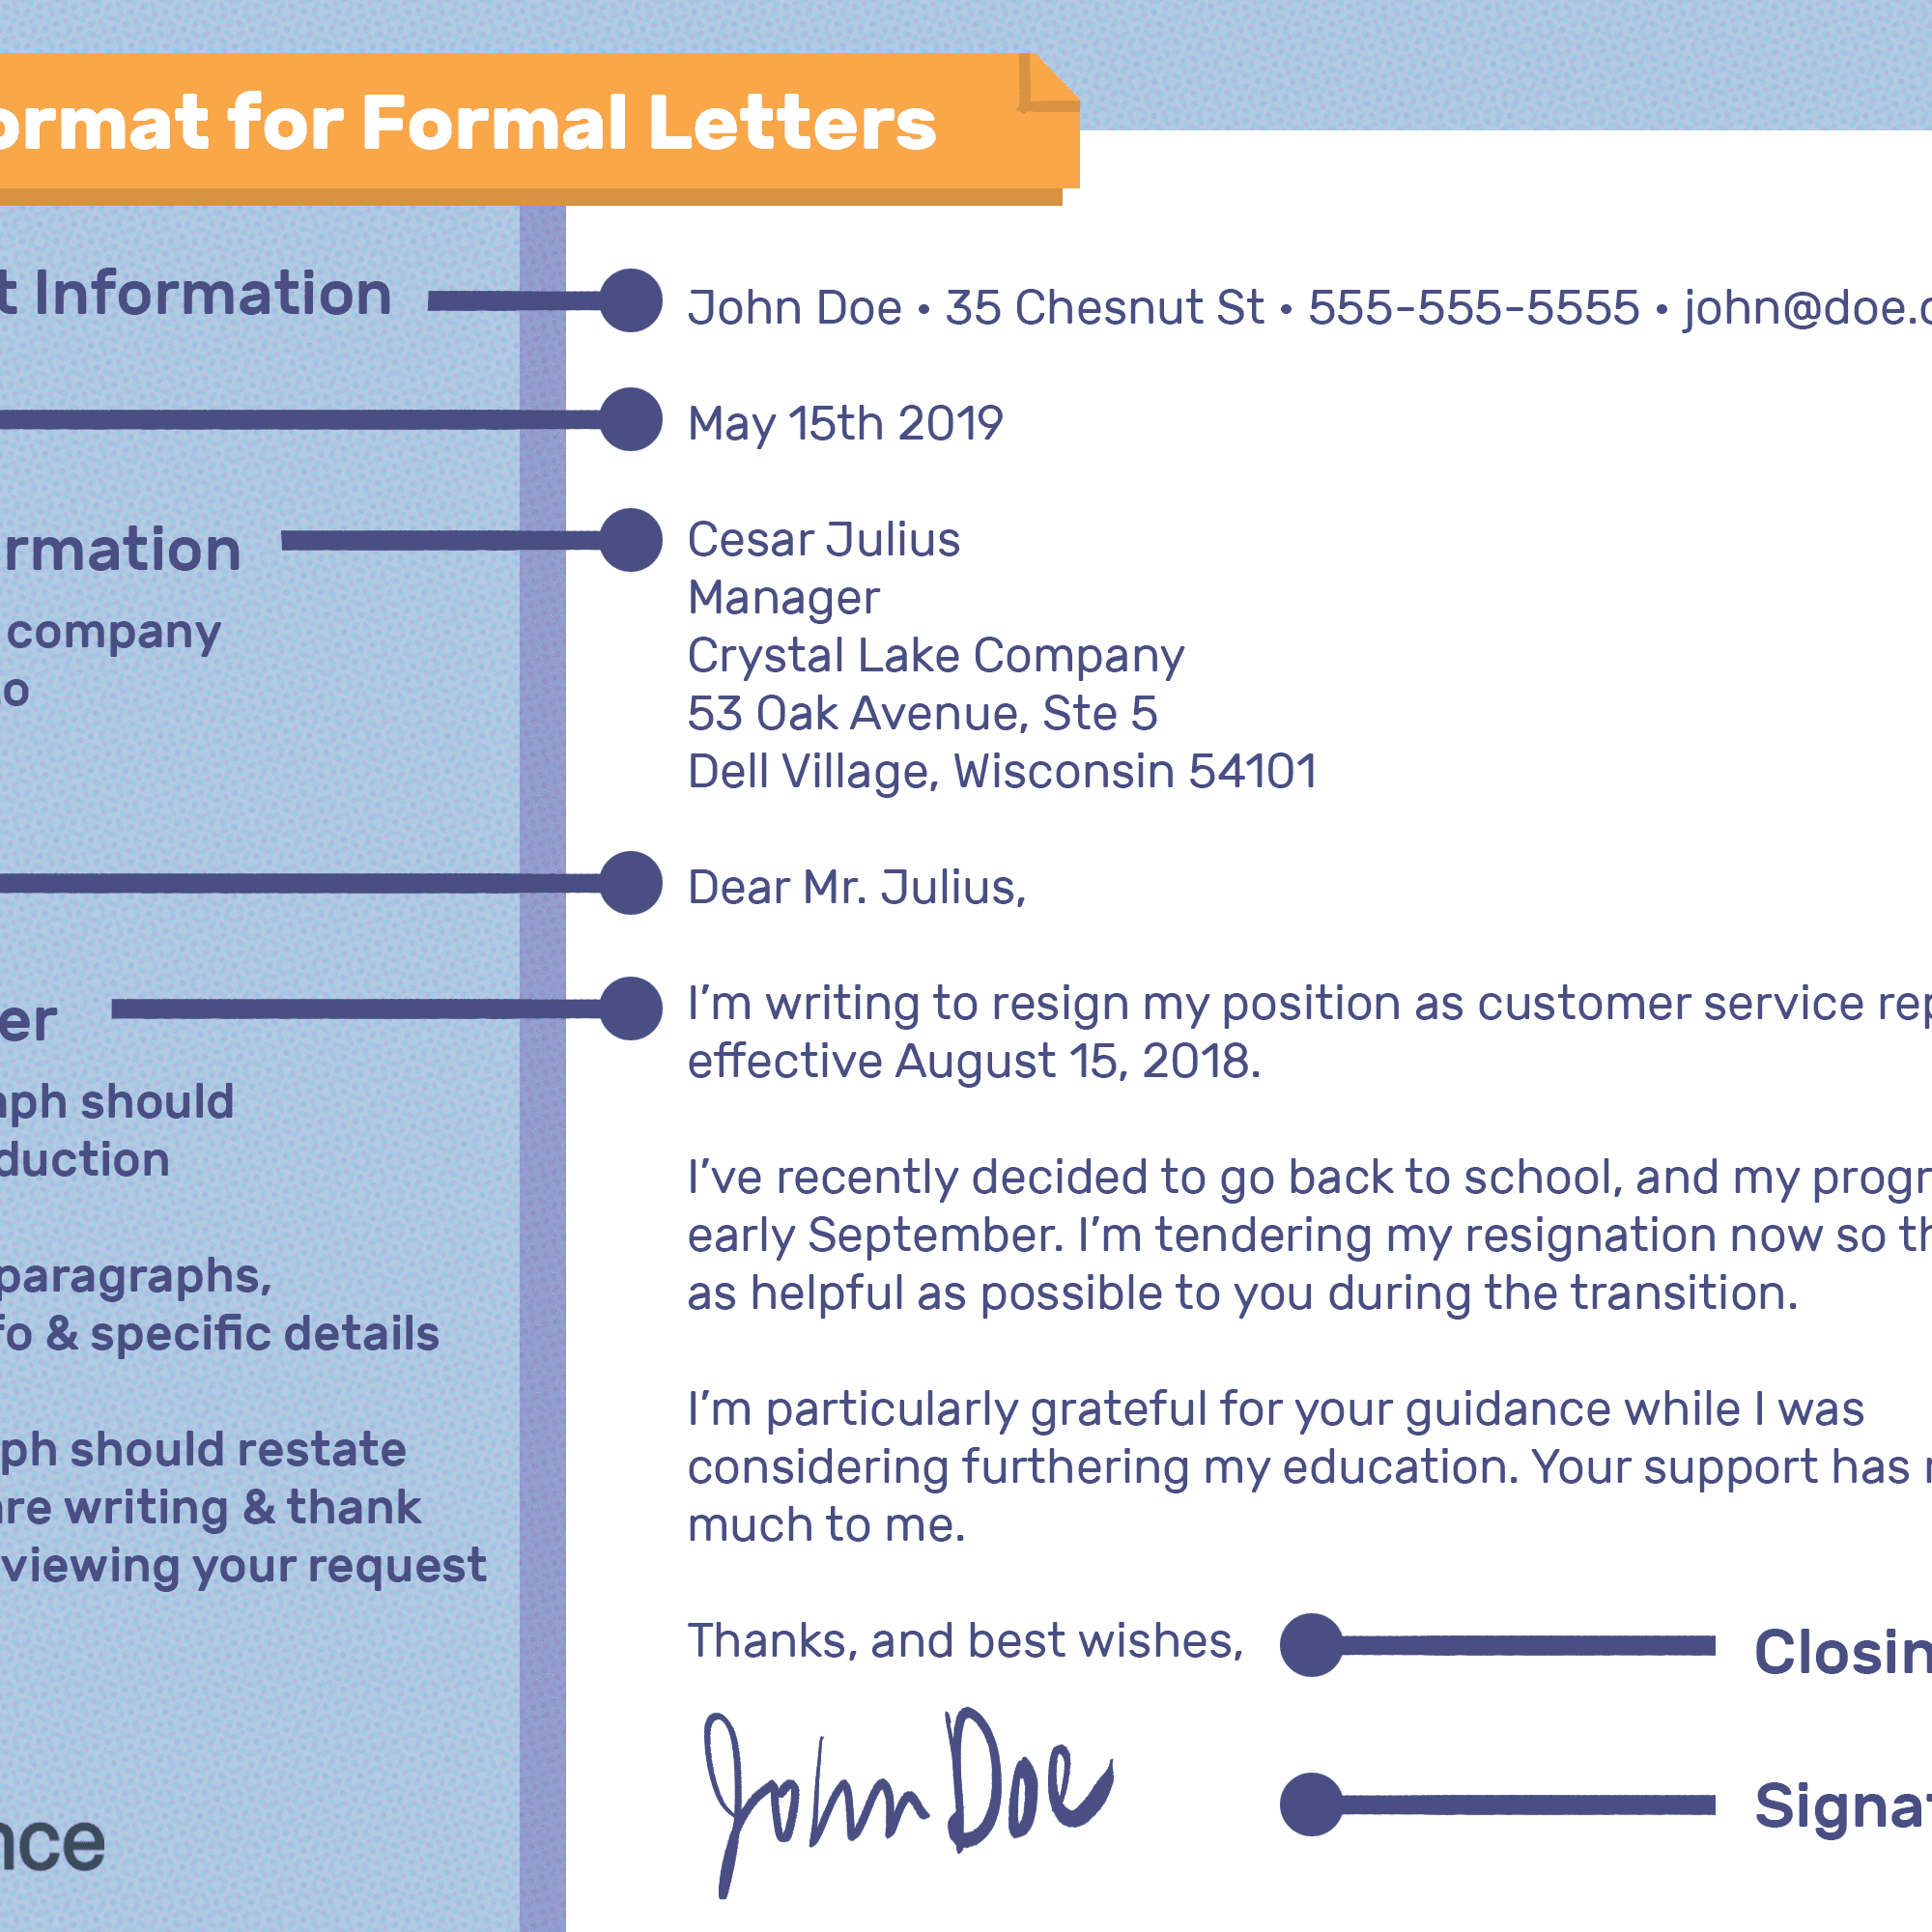 Writing a Formal Letter. Business Letter пример. How to write a Letter. Business Letter шаблон. Should be addressed